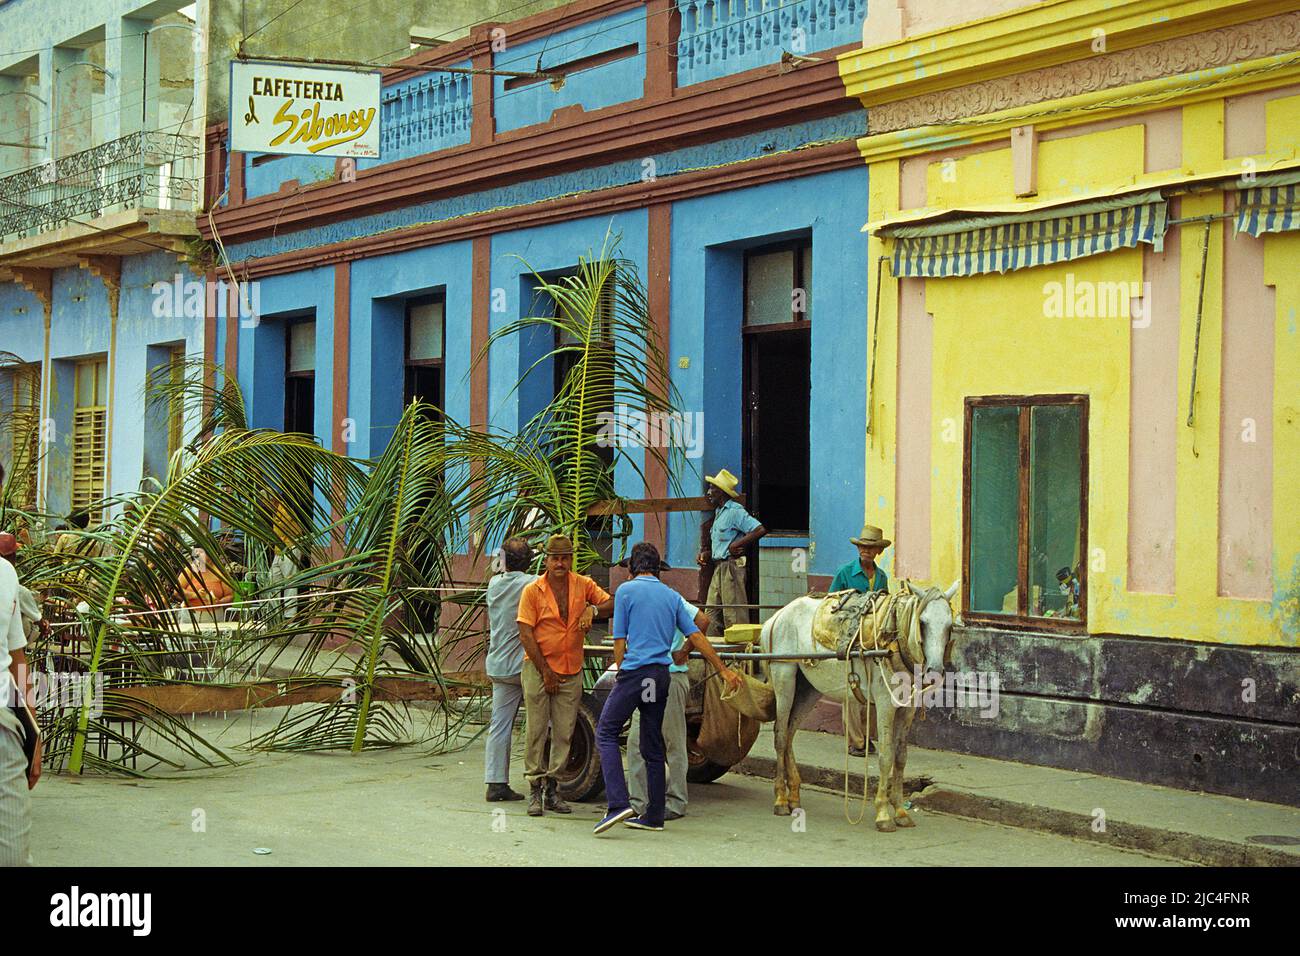 Cuban men at a horse-drawn carriage in a alley of Trinidad, Unesco World Heritage Site, Cuba, Caribbean Stock Photo